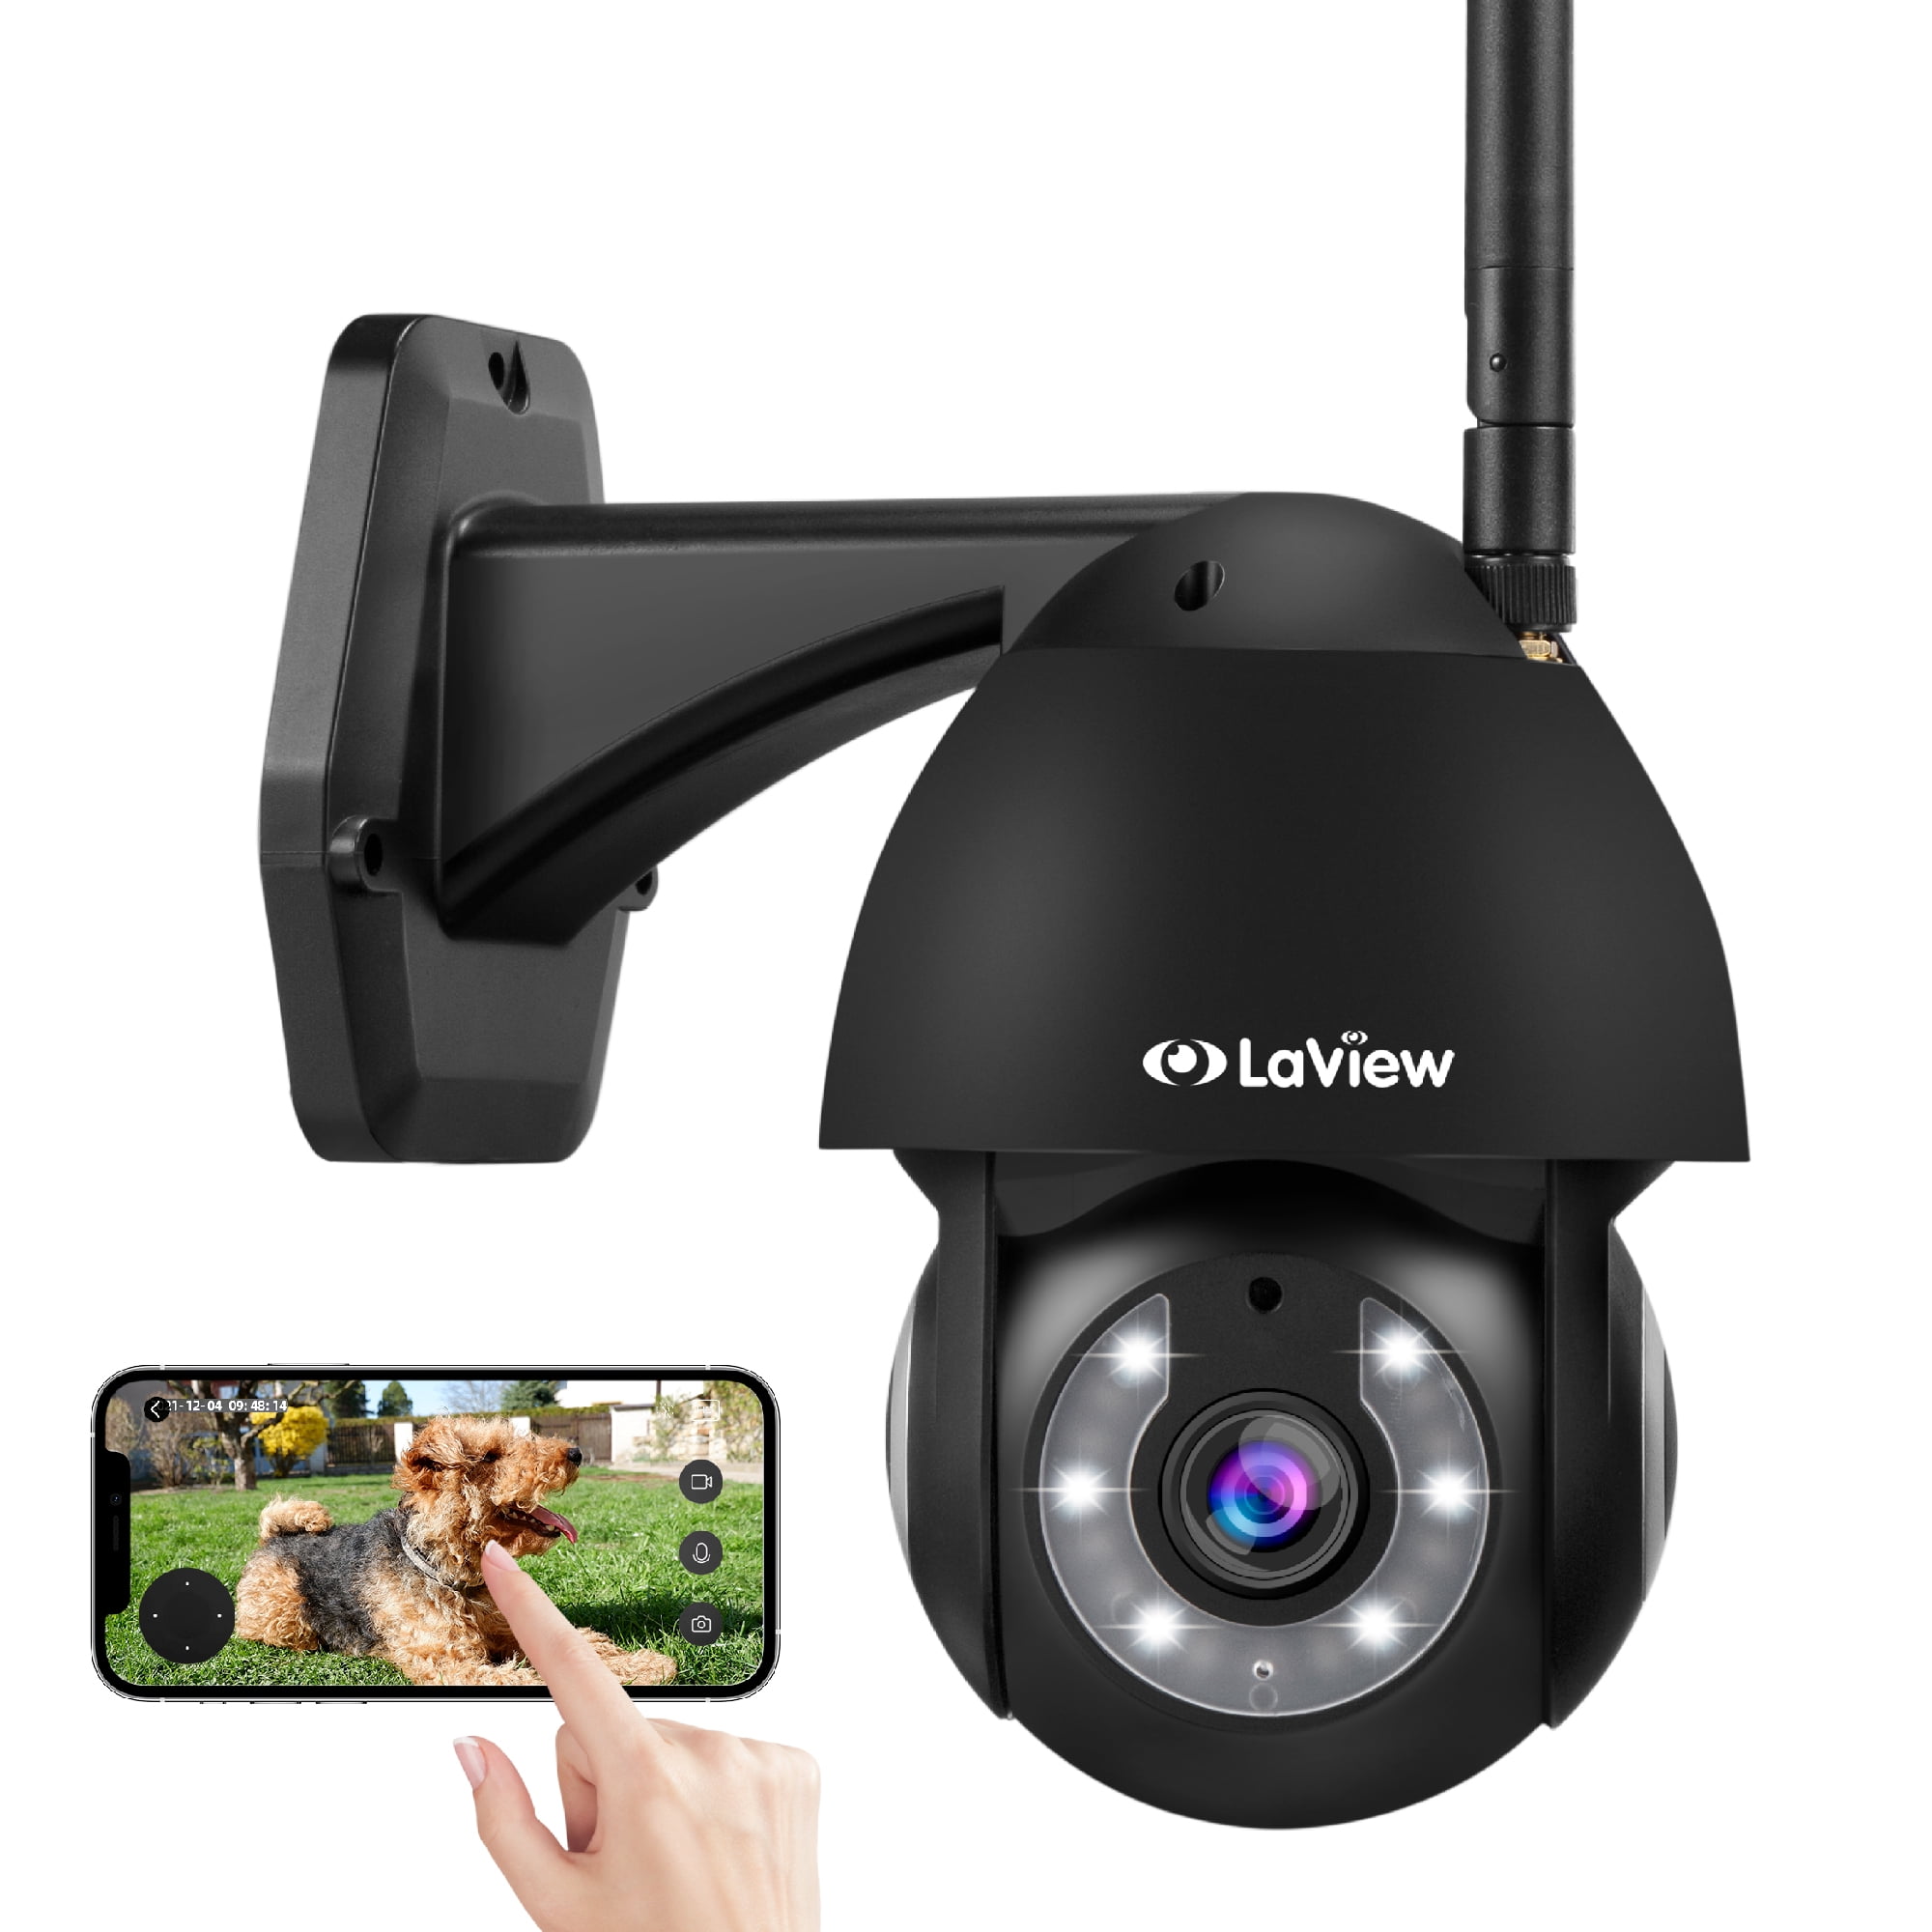 Laview 2K Security Camera Outdoor with Color Night Vision,4MP Wired Cameras for Home Security,IP66 Waterproof Camera, 24/7 Live Video,2 Way Audio